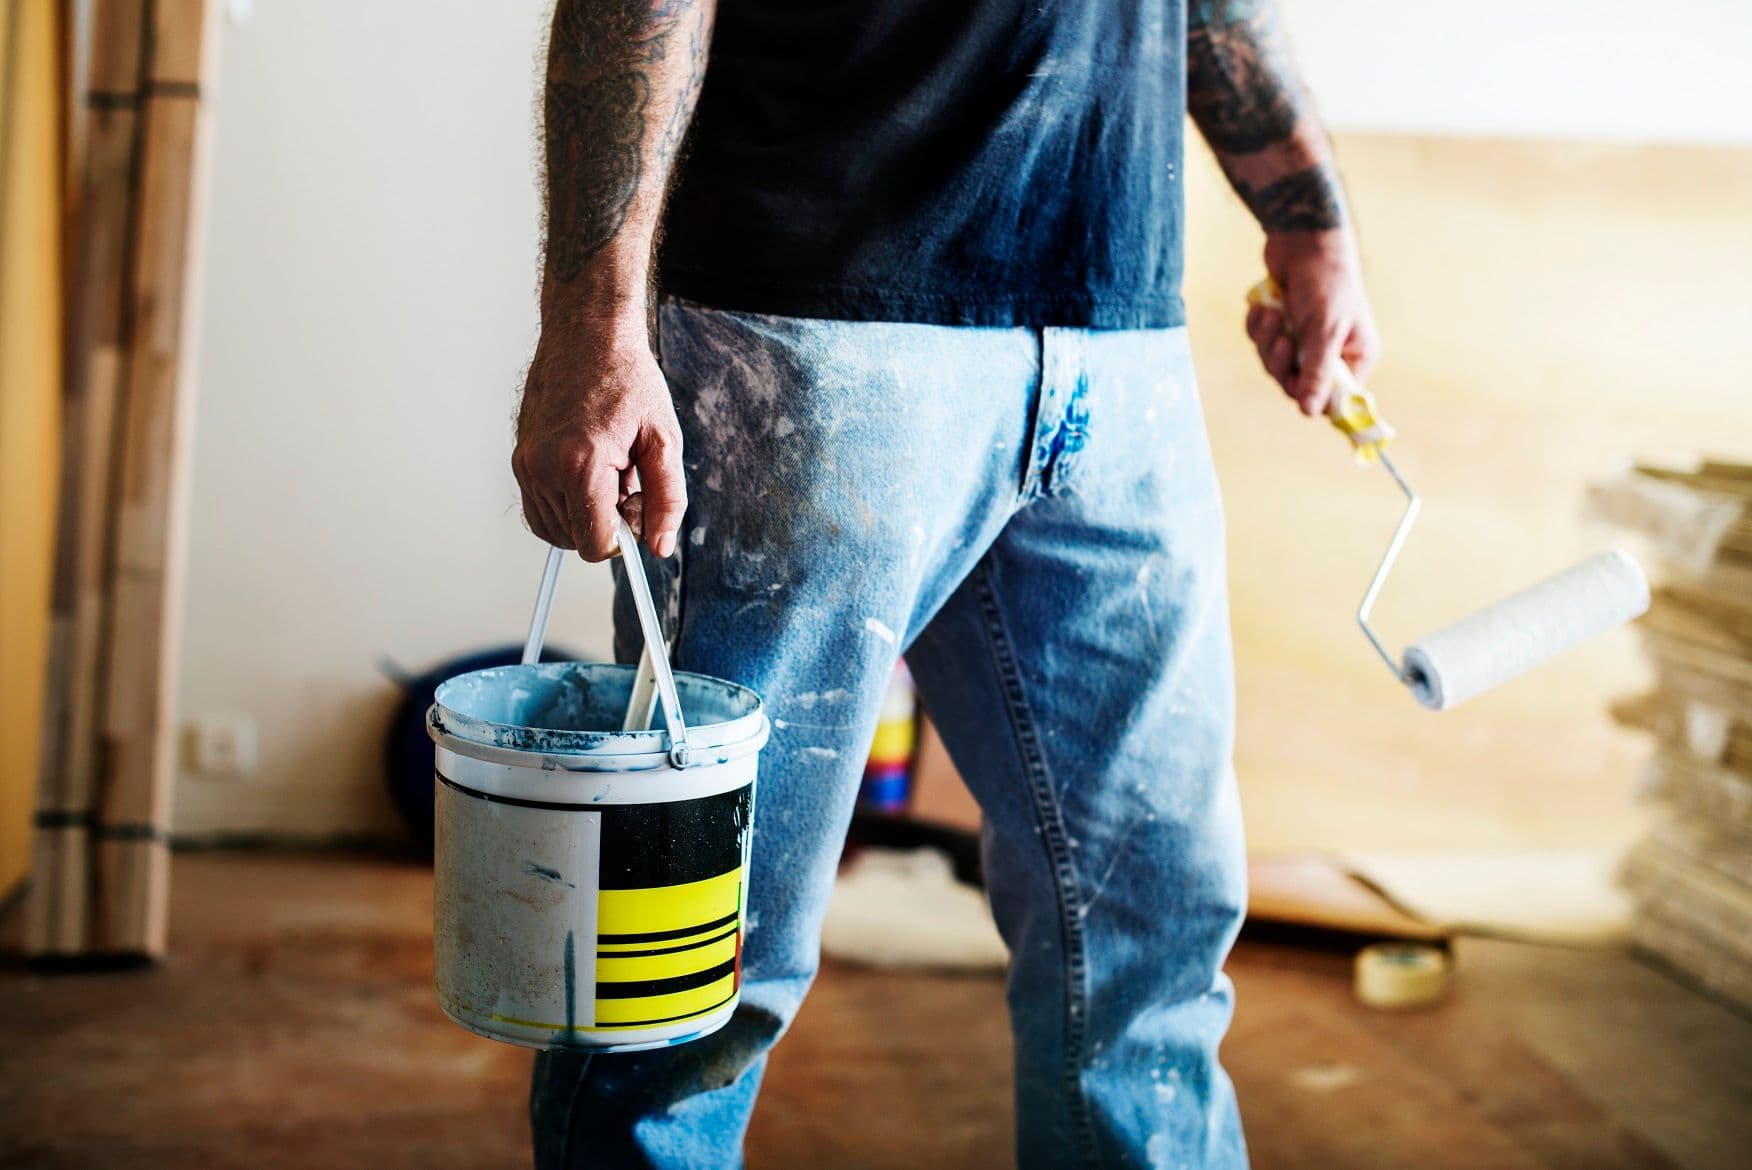 Business loan for Painters - Painter getting ready to paint